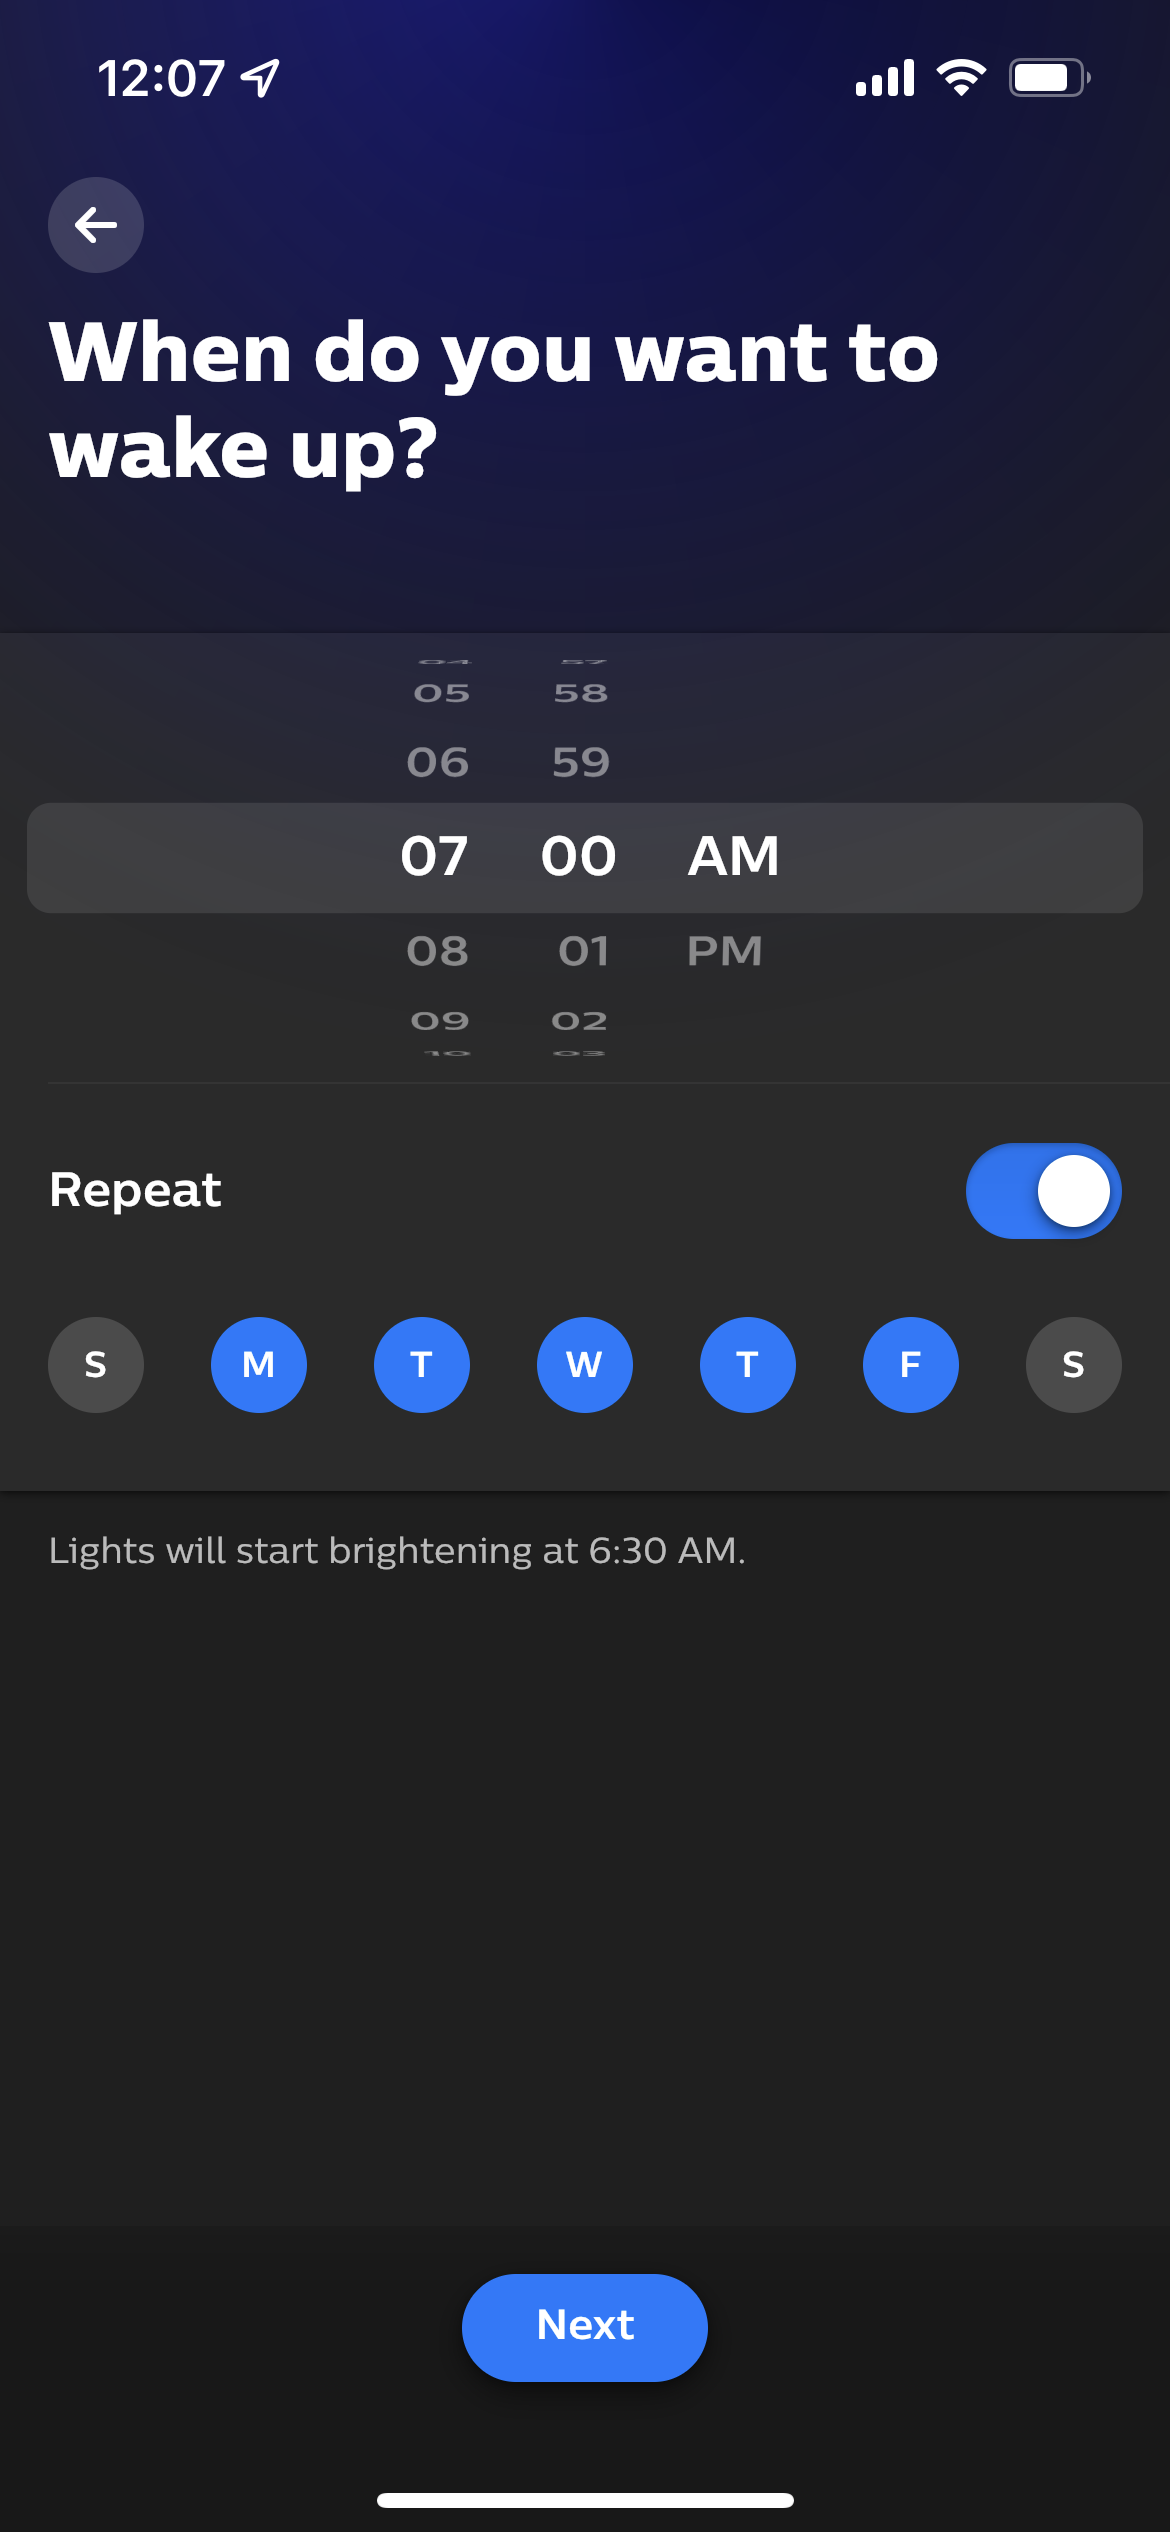 Configuring a wake up automation for Philips Hue